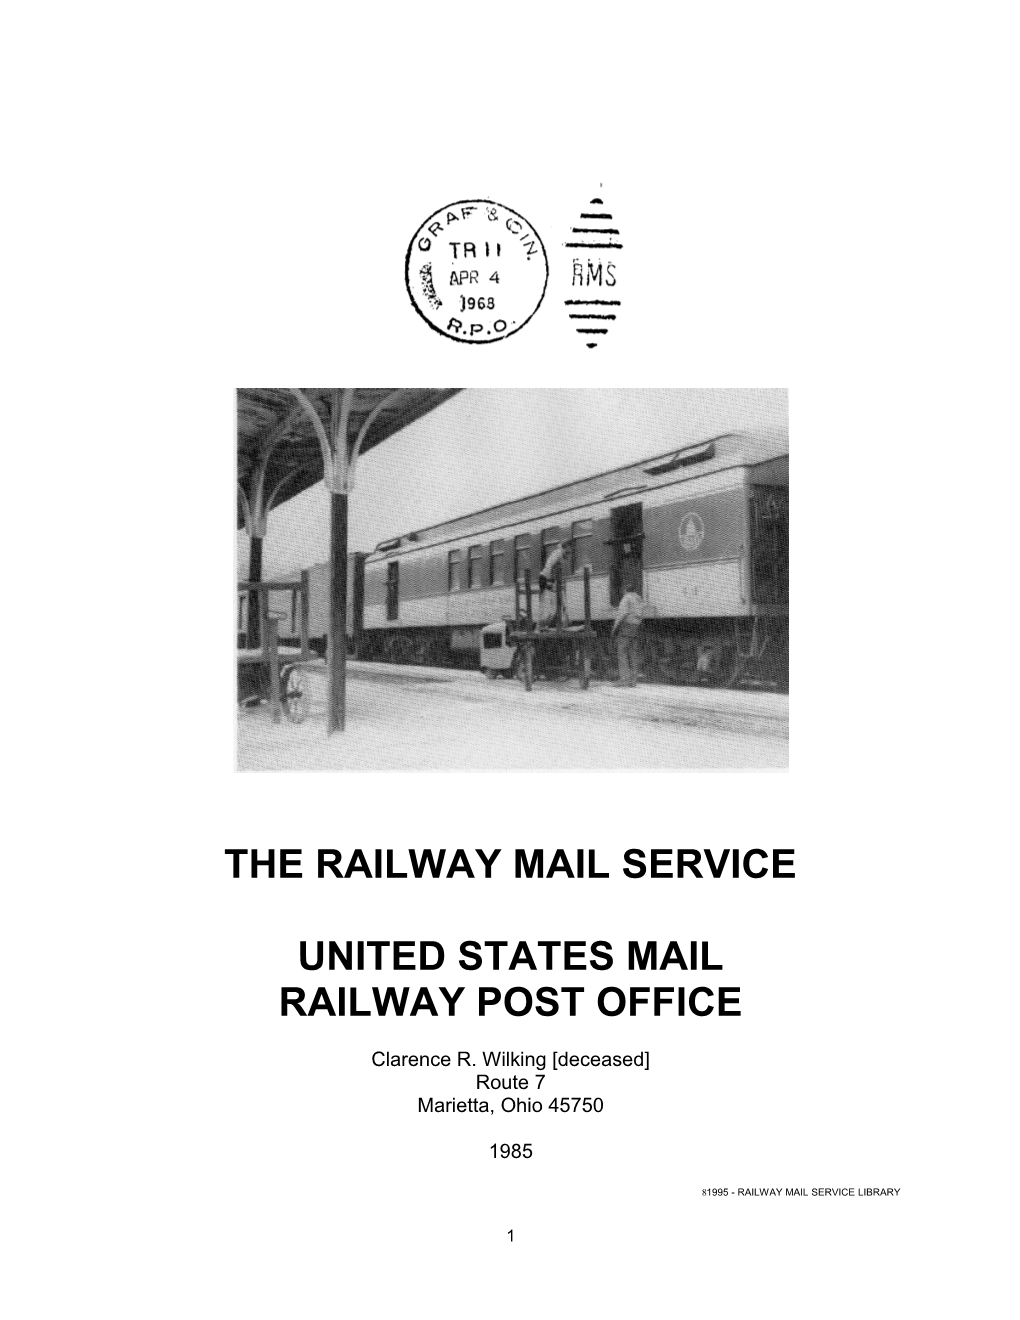 The Railway Mail Service